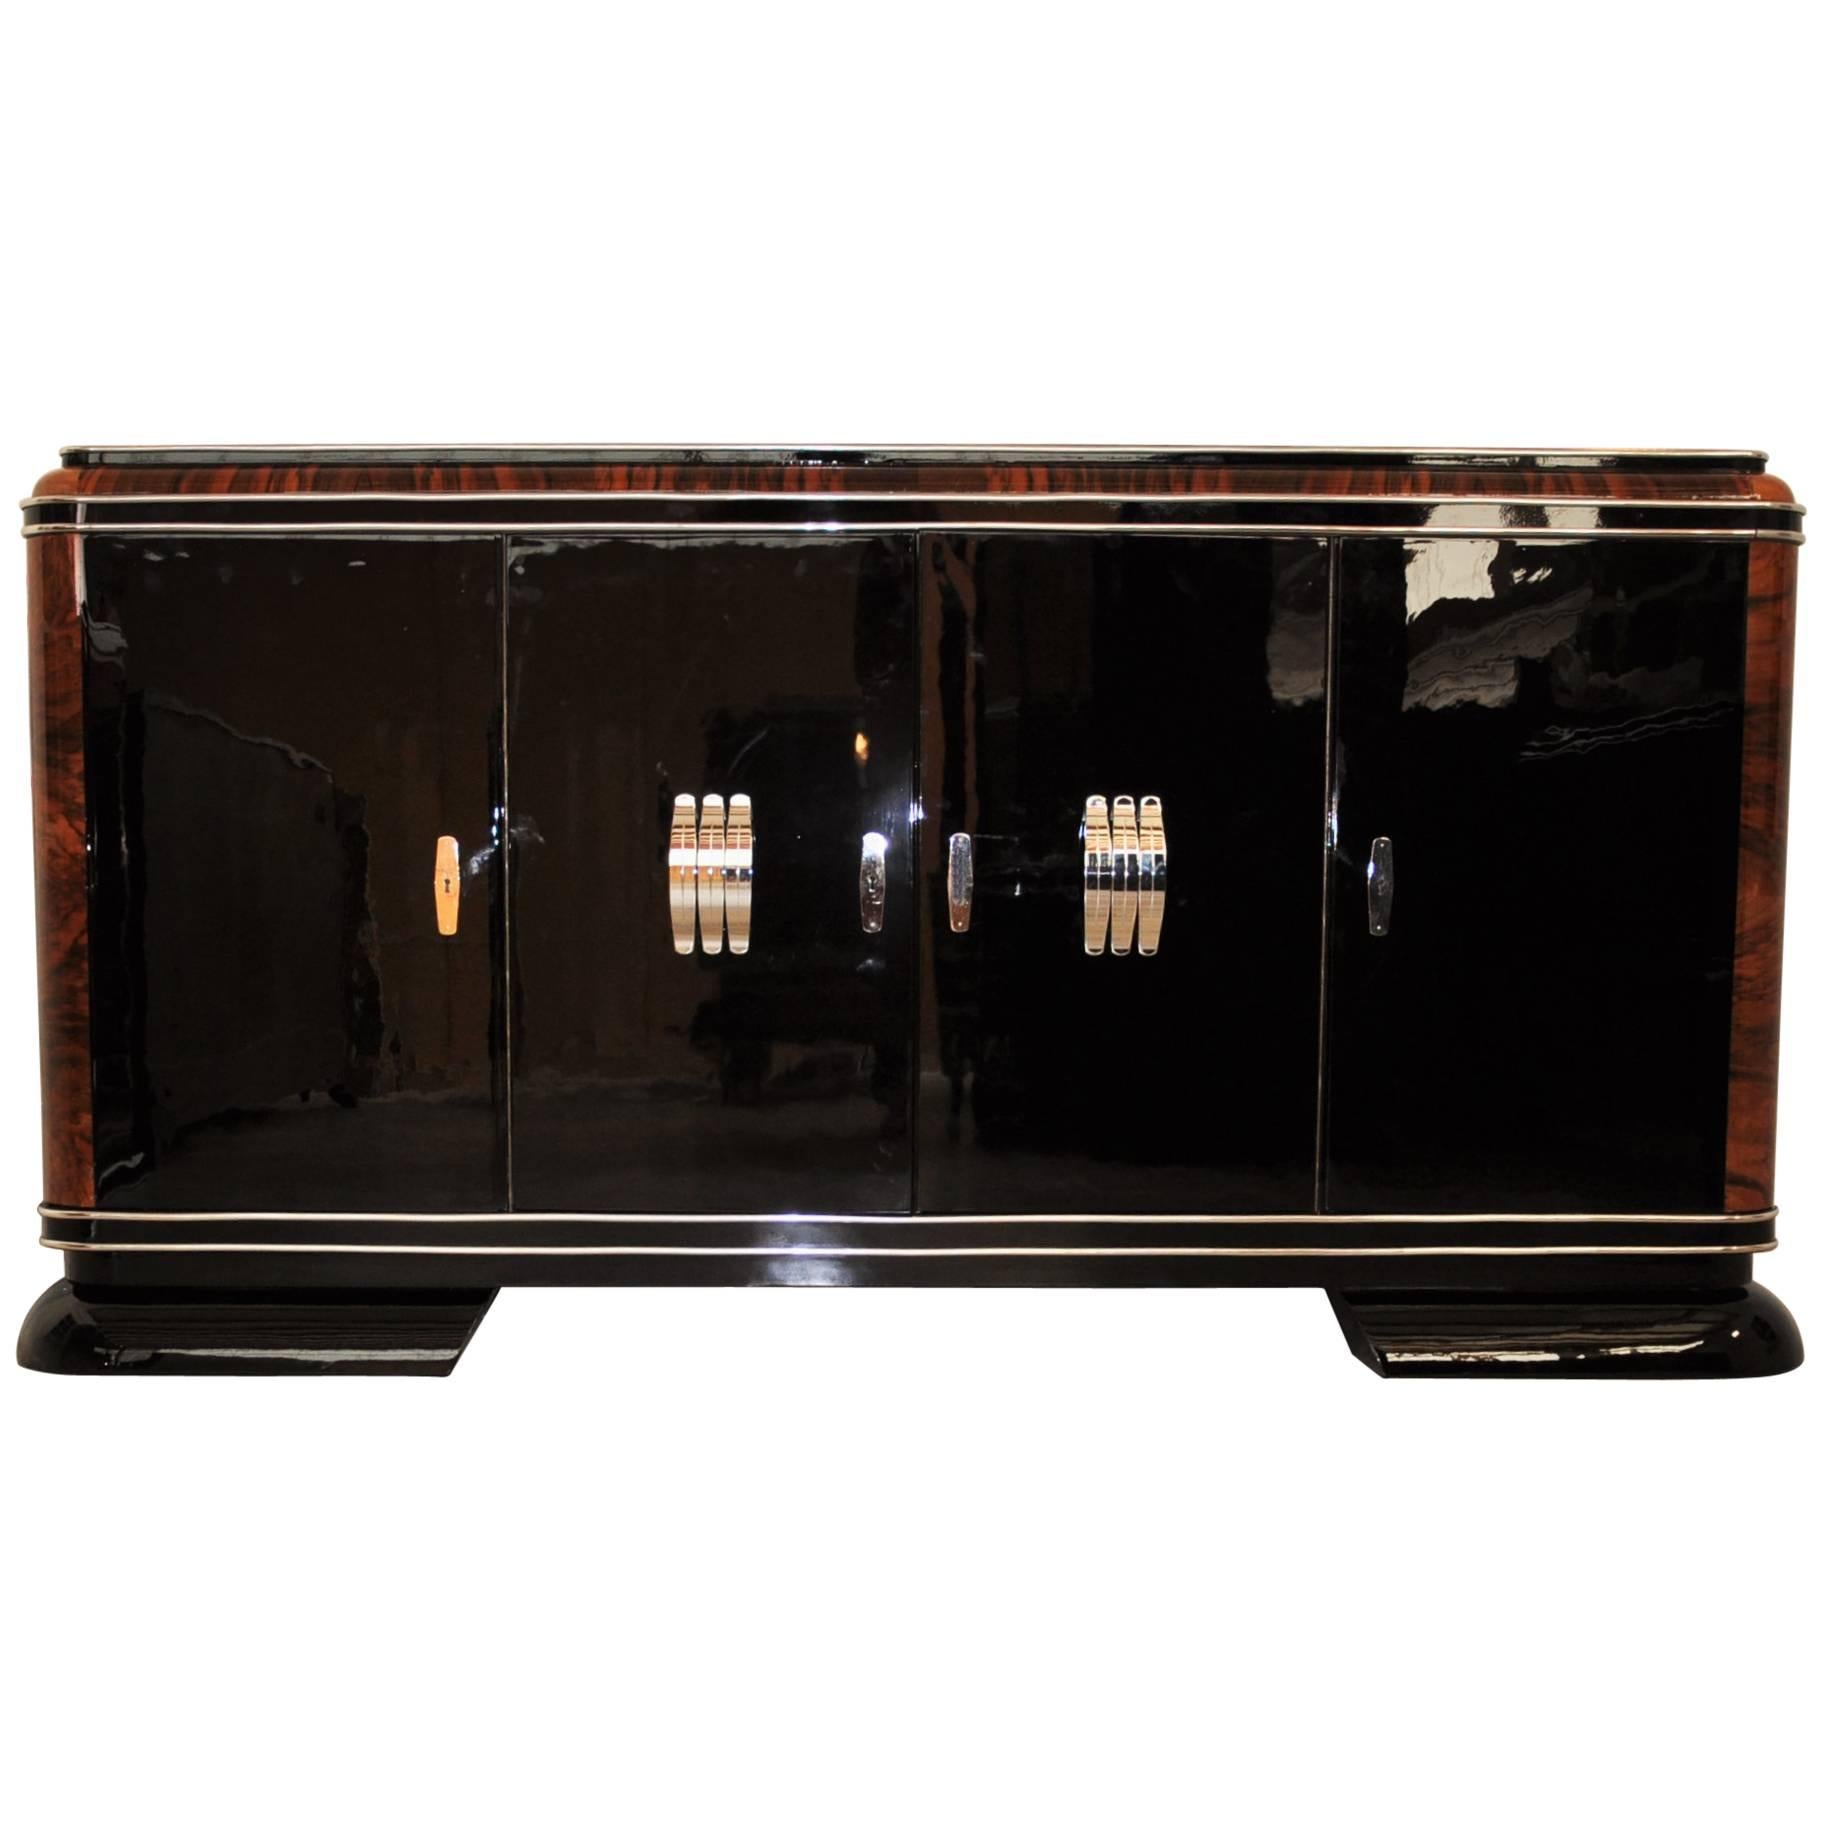 French Art Deco Sideboard with Piano Lacquer and Mahogany Details